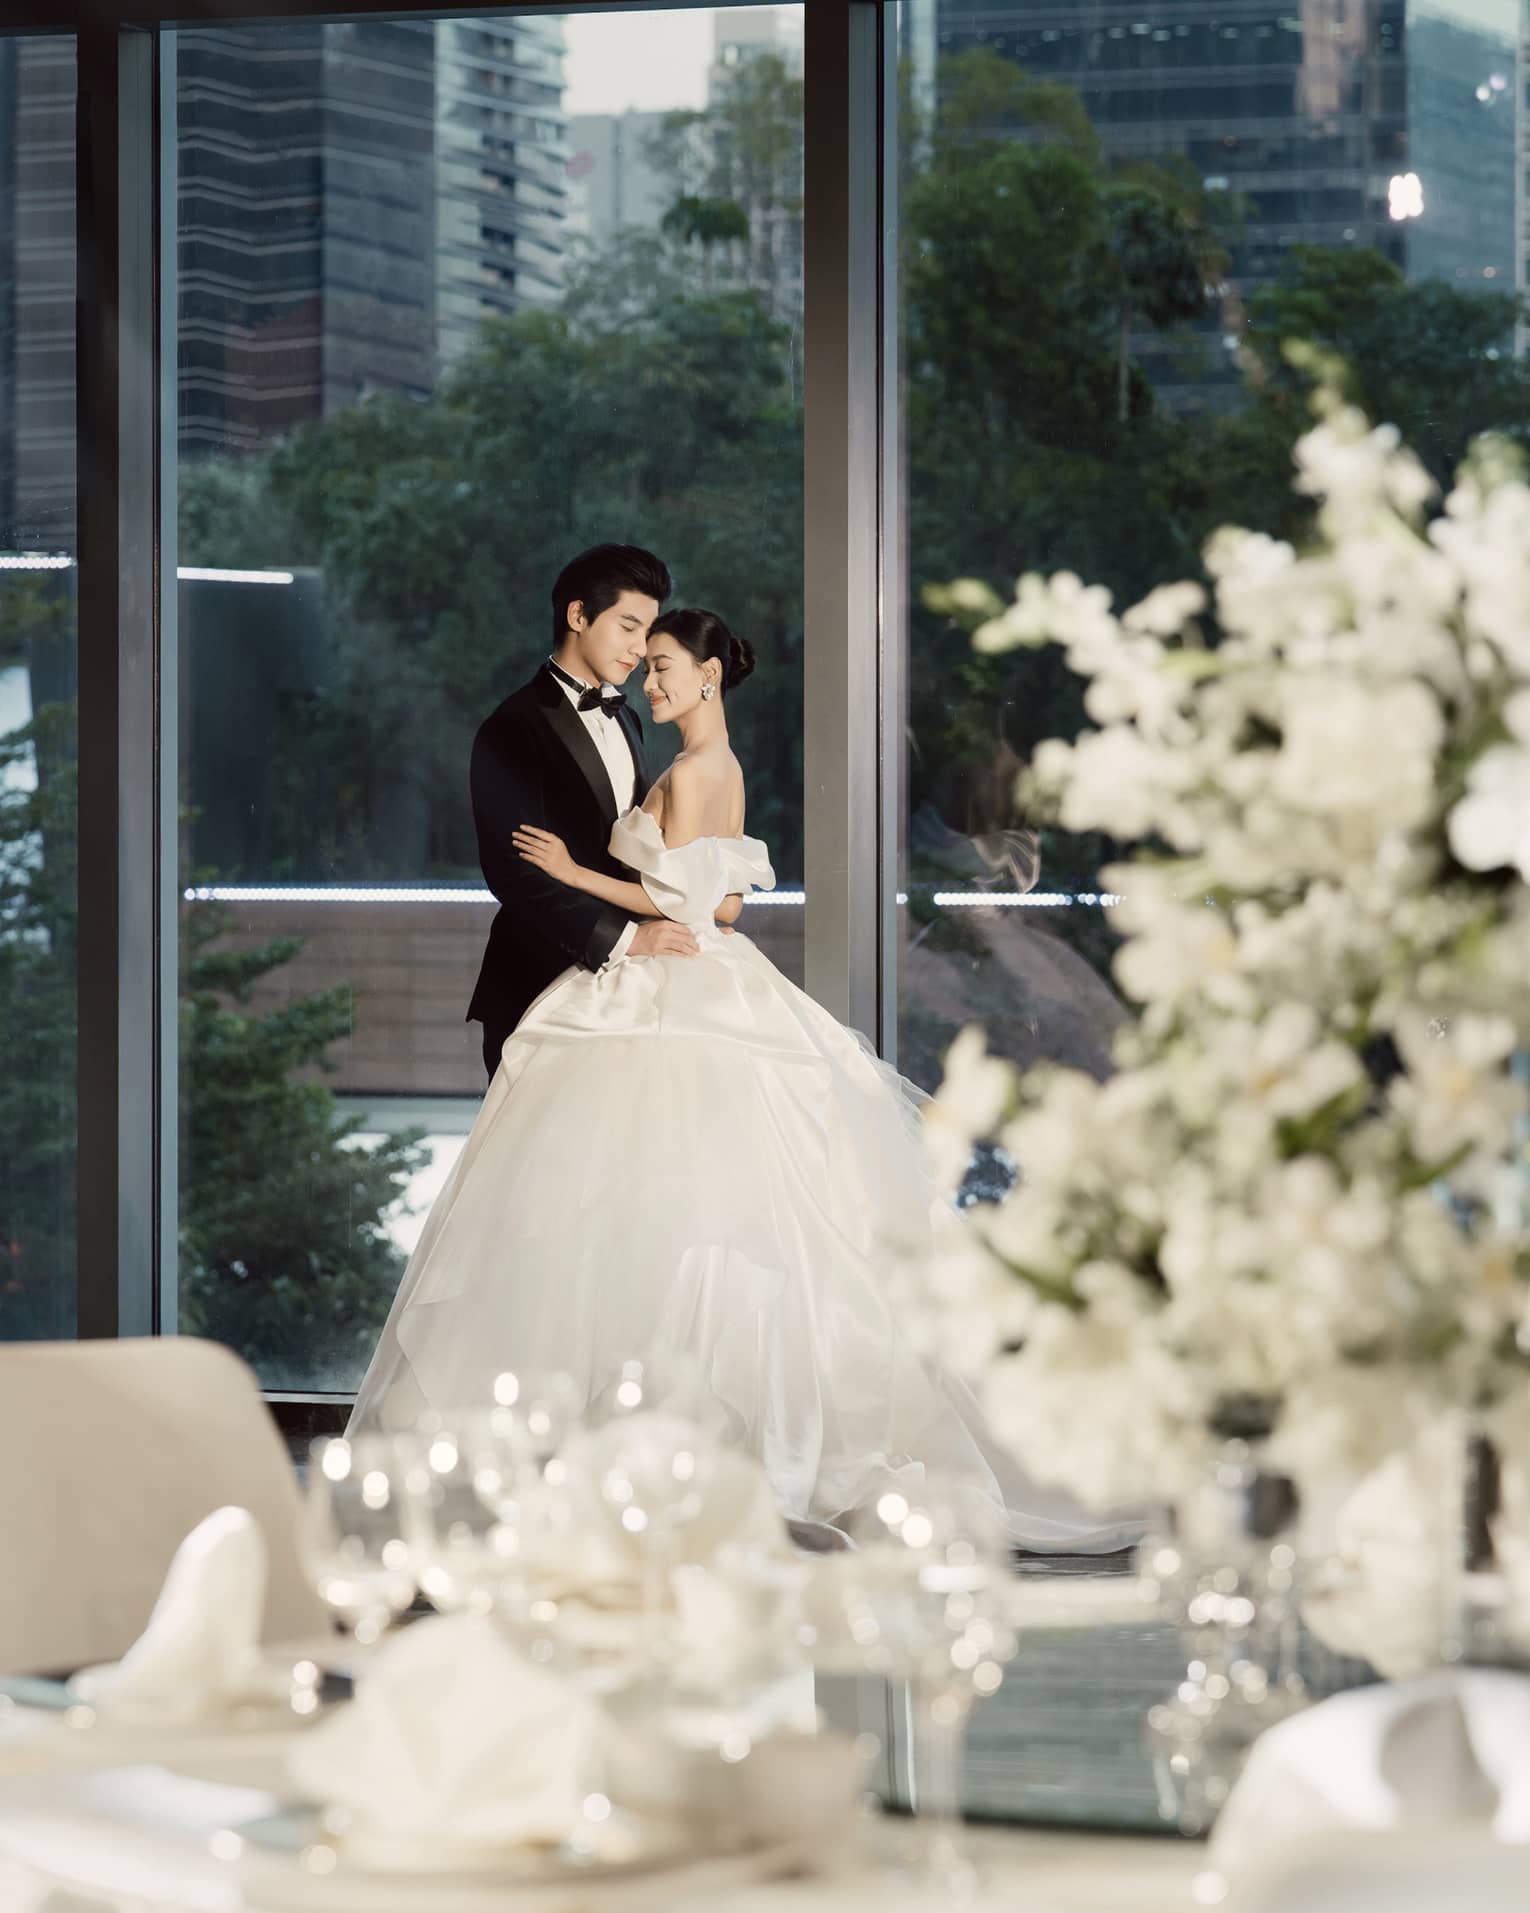 Bride and groom embrace in ballroom with floor-to-ceiling windows